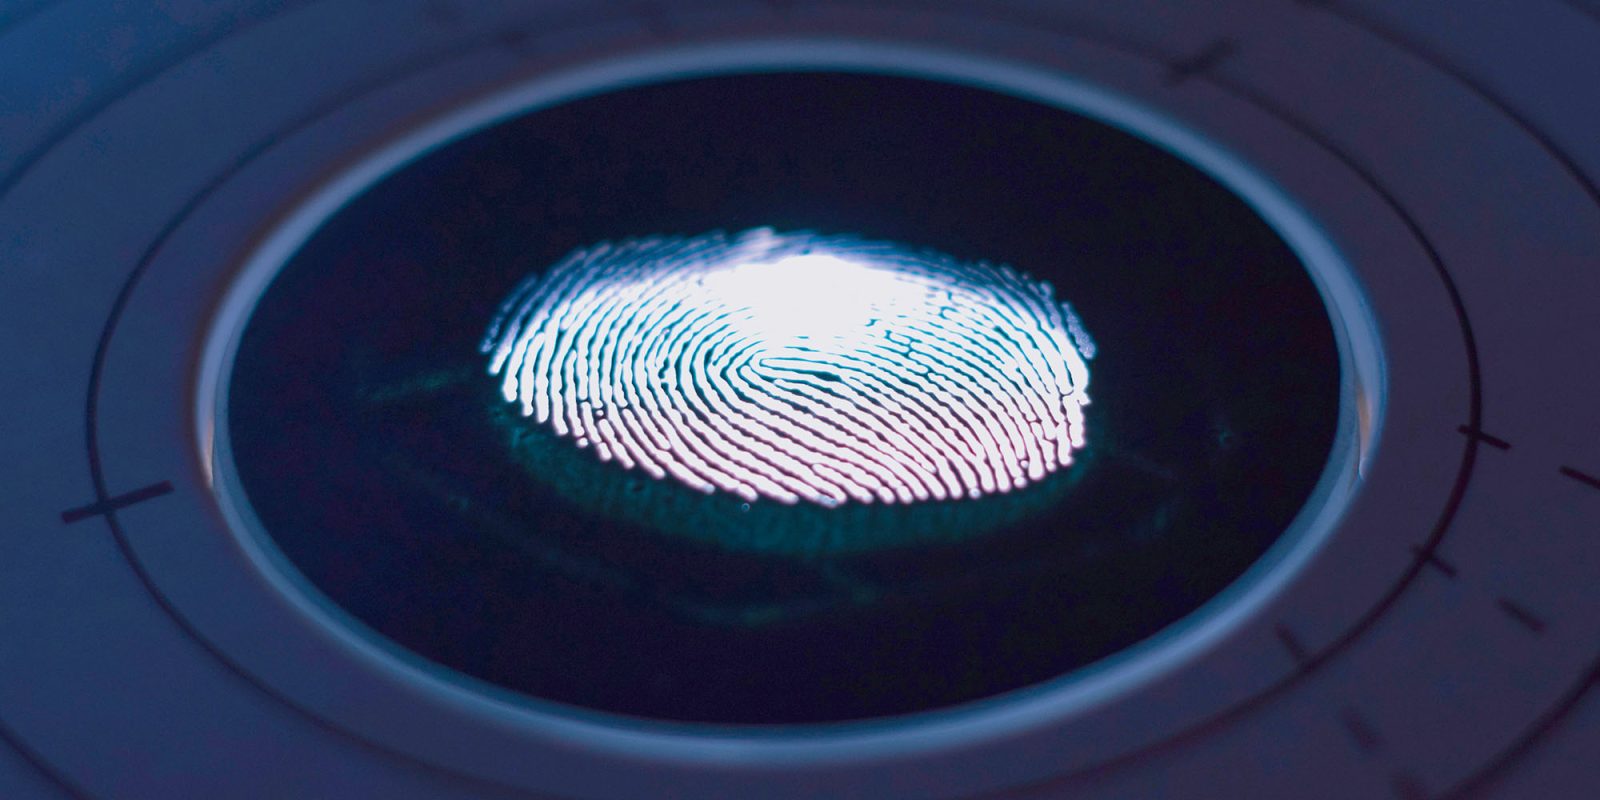 Law on thumbprint to unlock phone is complex | Thumbprint on screen